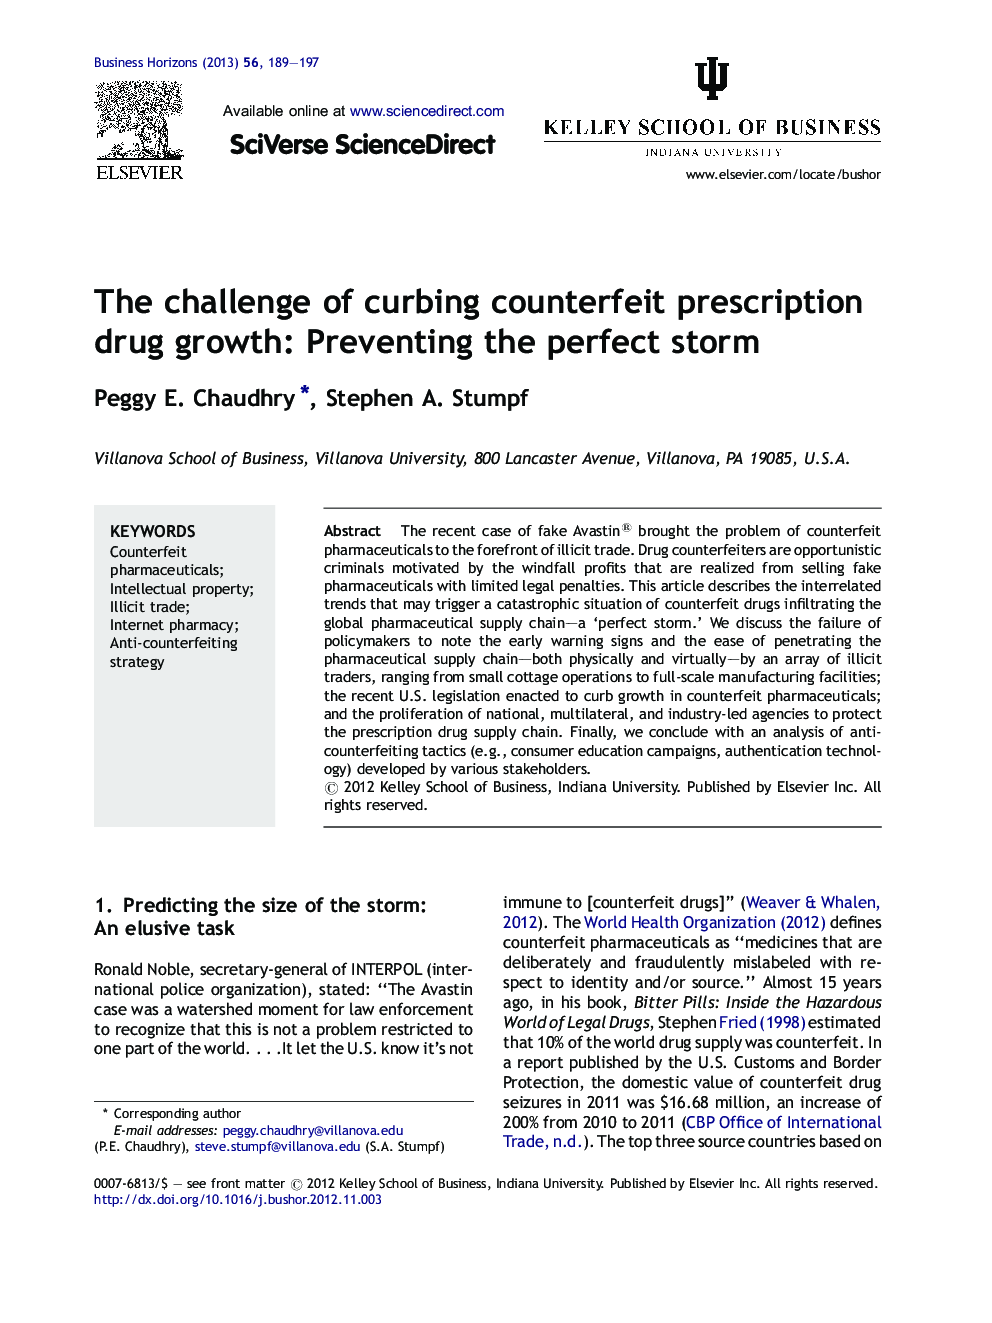 The challenge of curbing counterfeit prescription drug growth: Preventing the perfect storm